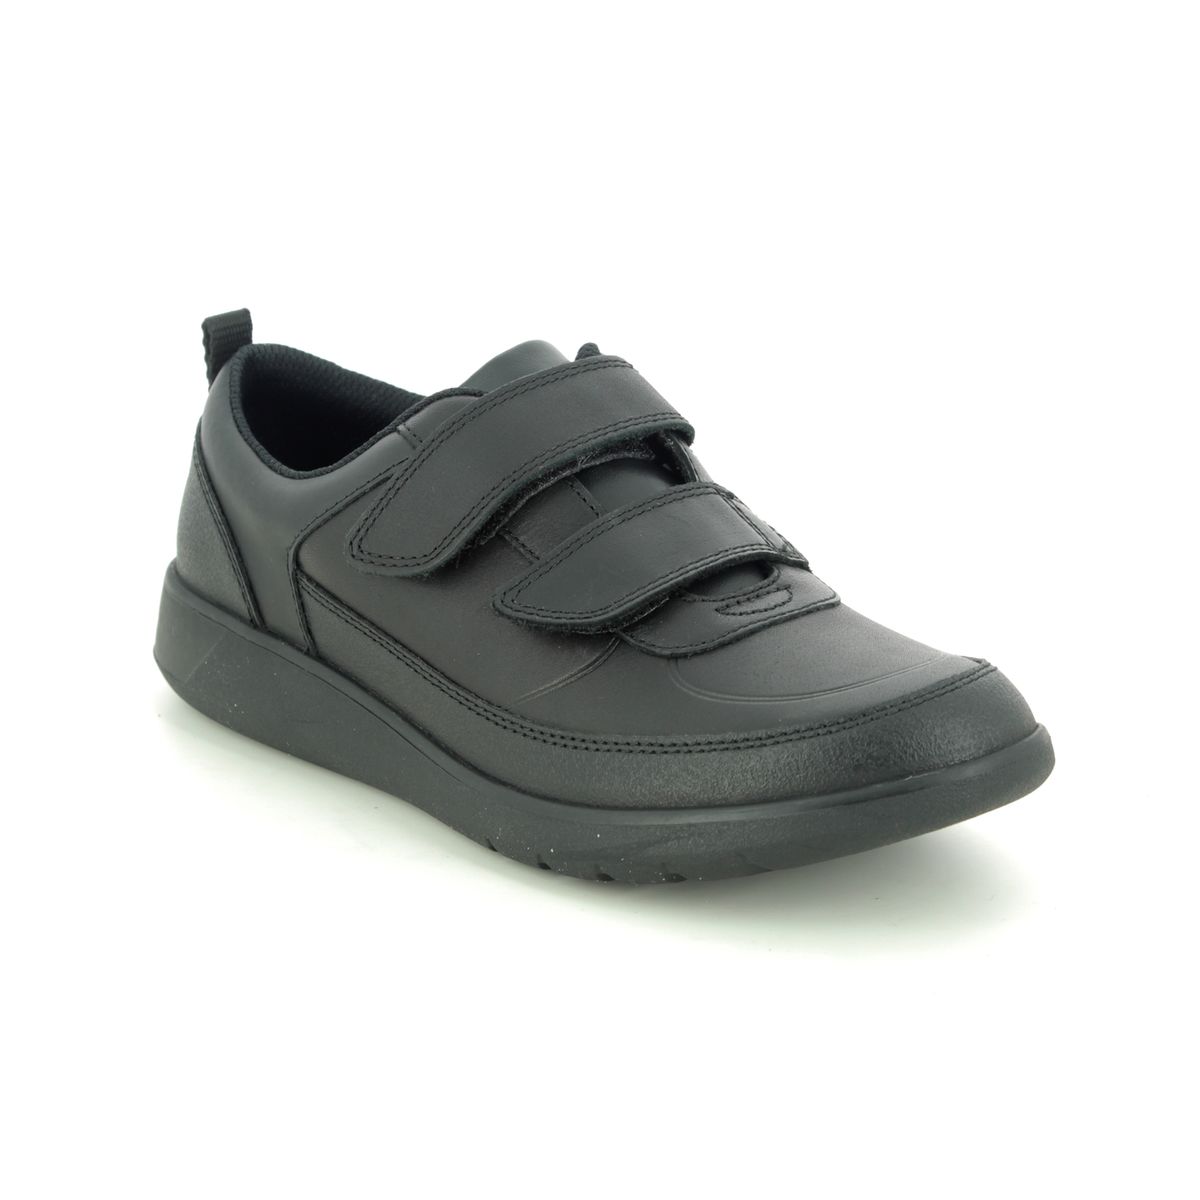 Clarks Scape Flare Y Black Leather Kids Boys Shoes 494098H In Size 3.5 In Plain Black Leather H Width Fitting Extra Wide For School For kids